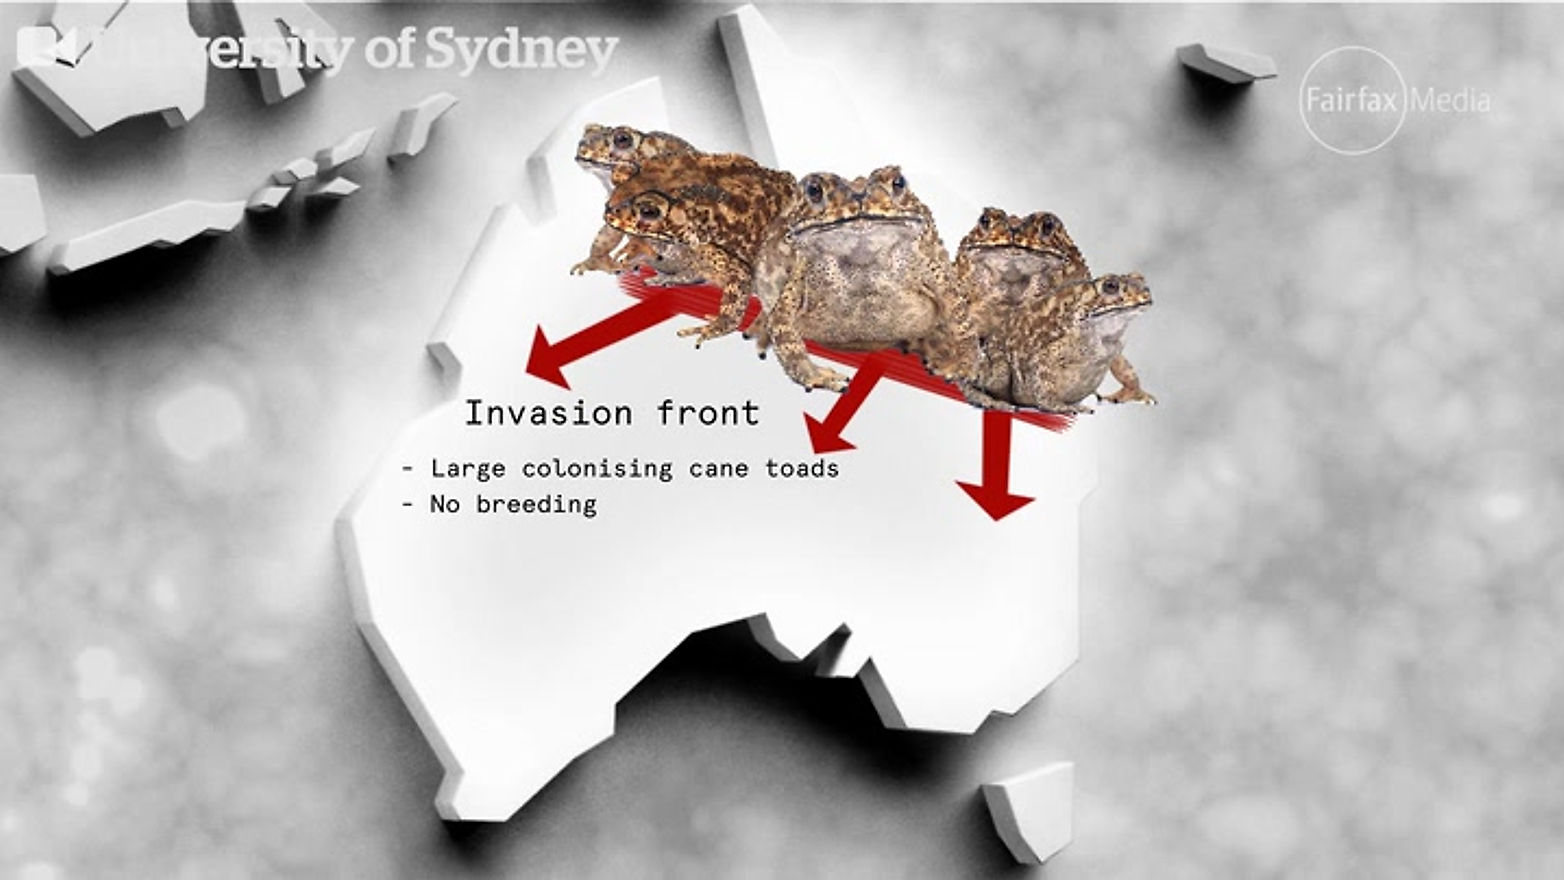 Surviving the cane toad invasion